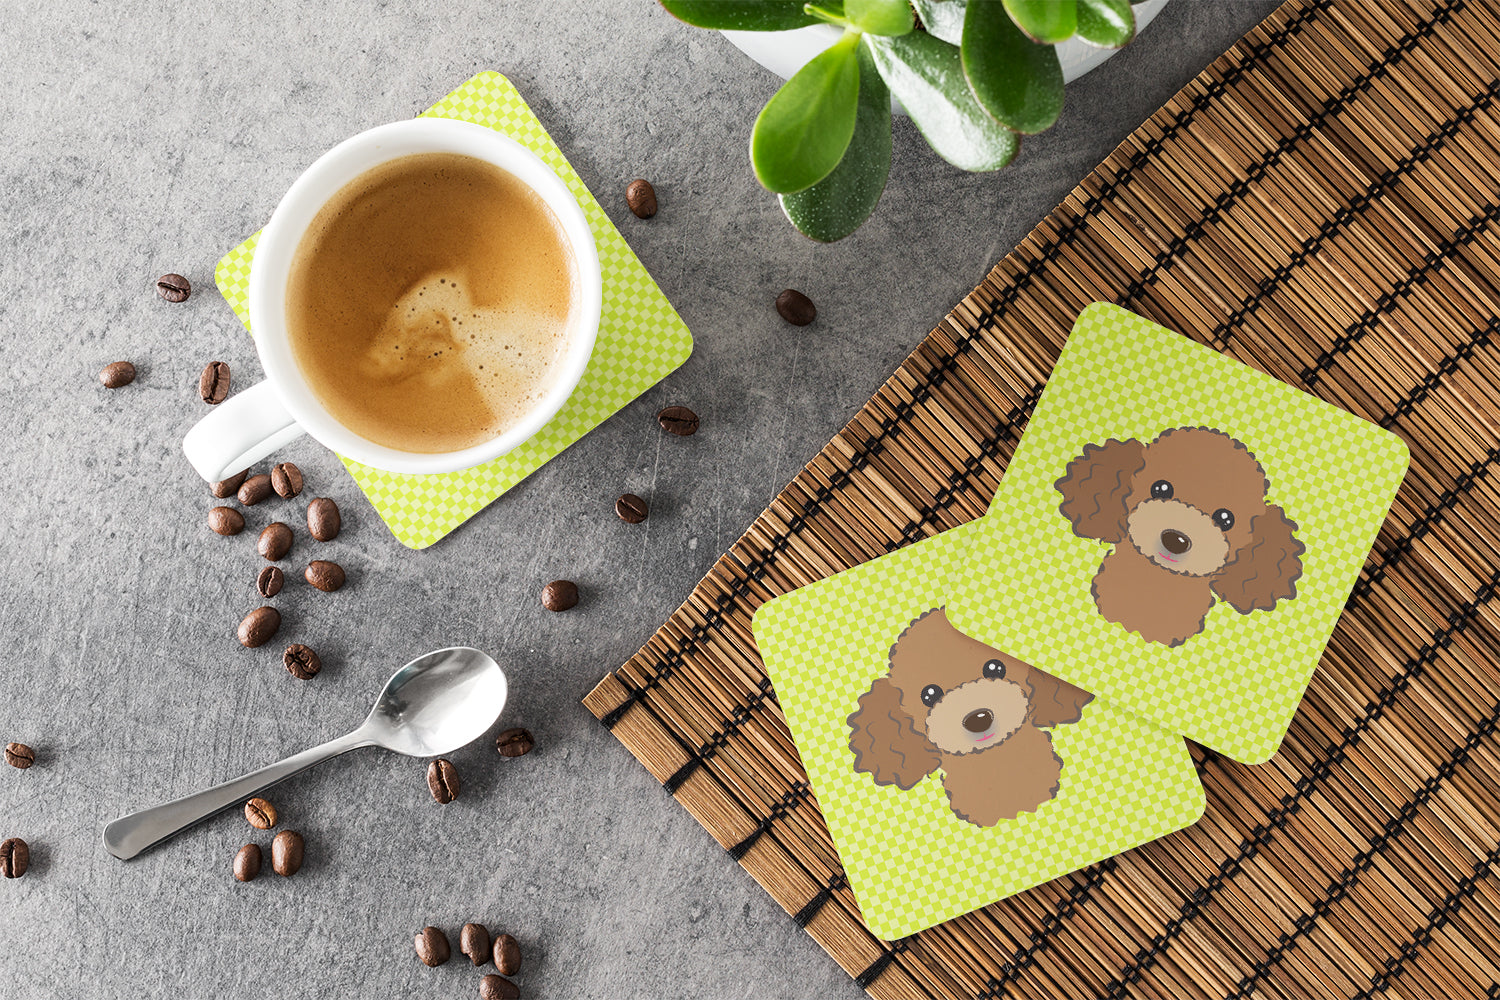 Set of 4 Checkerboard Lime Green Chocolate Brown Poodle Foam Coasters BB1318FC - the-store.com